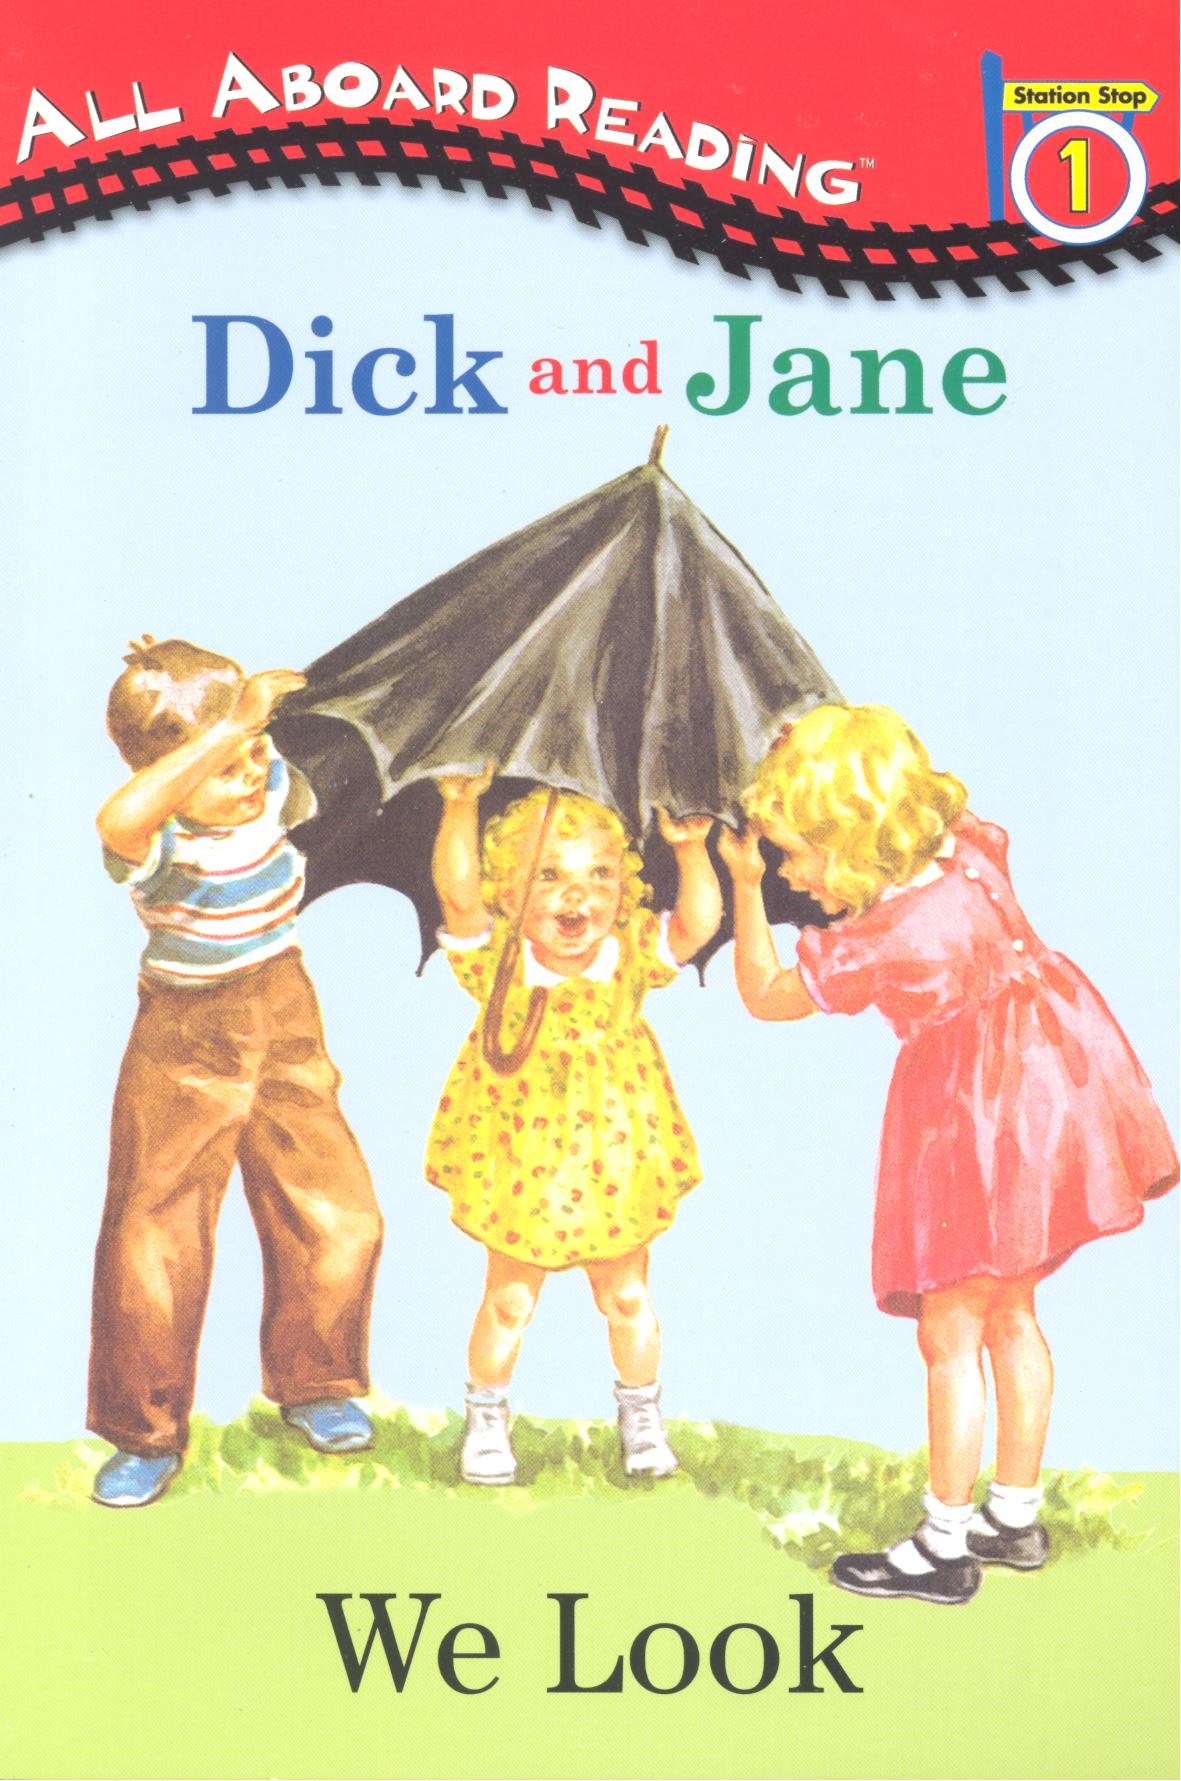 dick-and-jane-we-look-gospel-publishers-usa